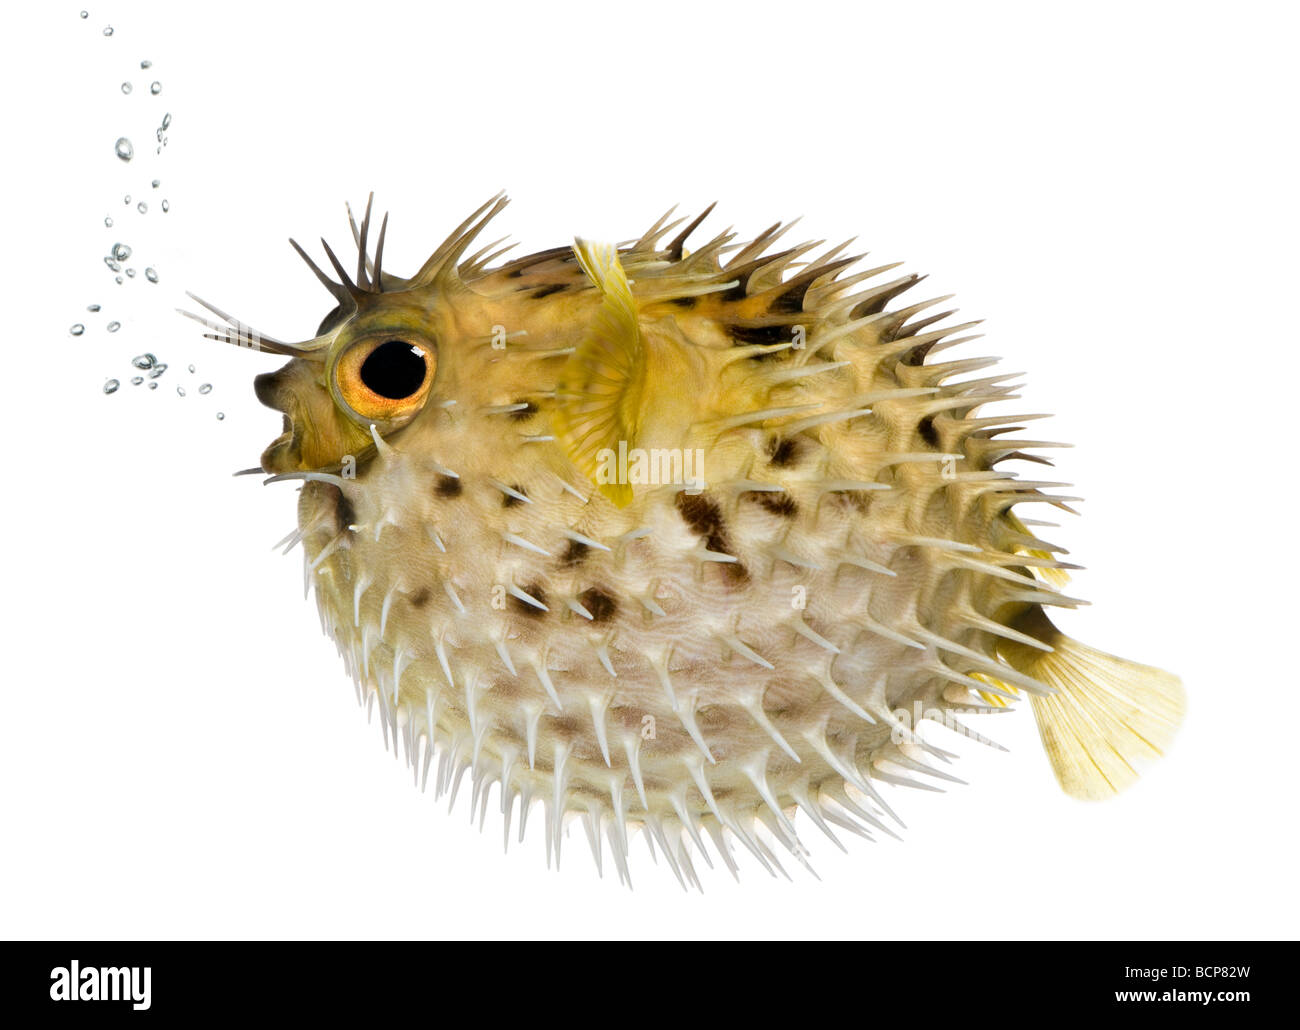 Long spine porcupinefish, also know as spiny balloonfish fish, Diodon holocanthus, in front of a white background Stock Photo